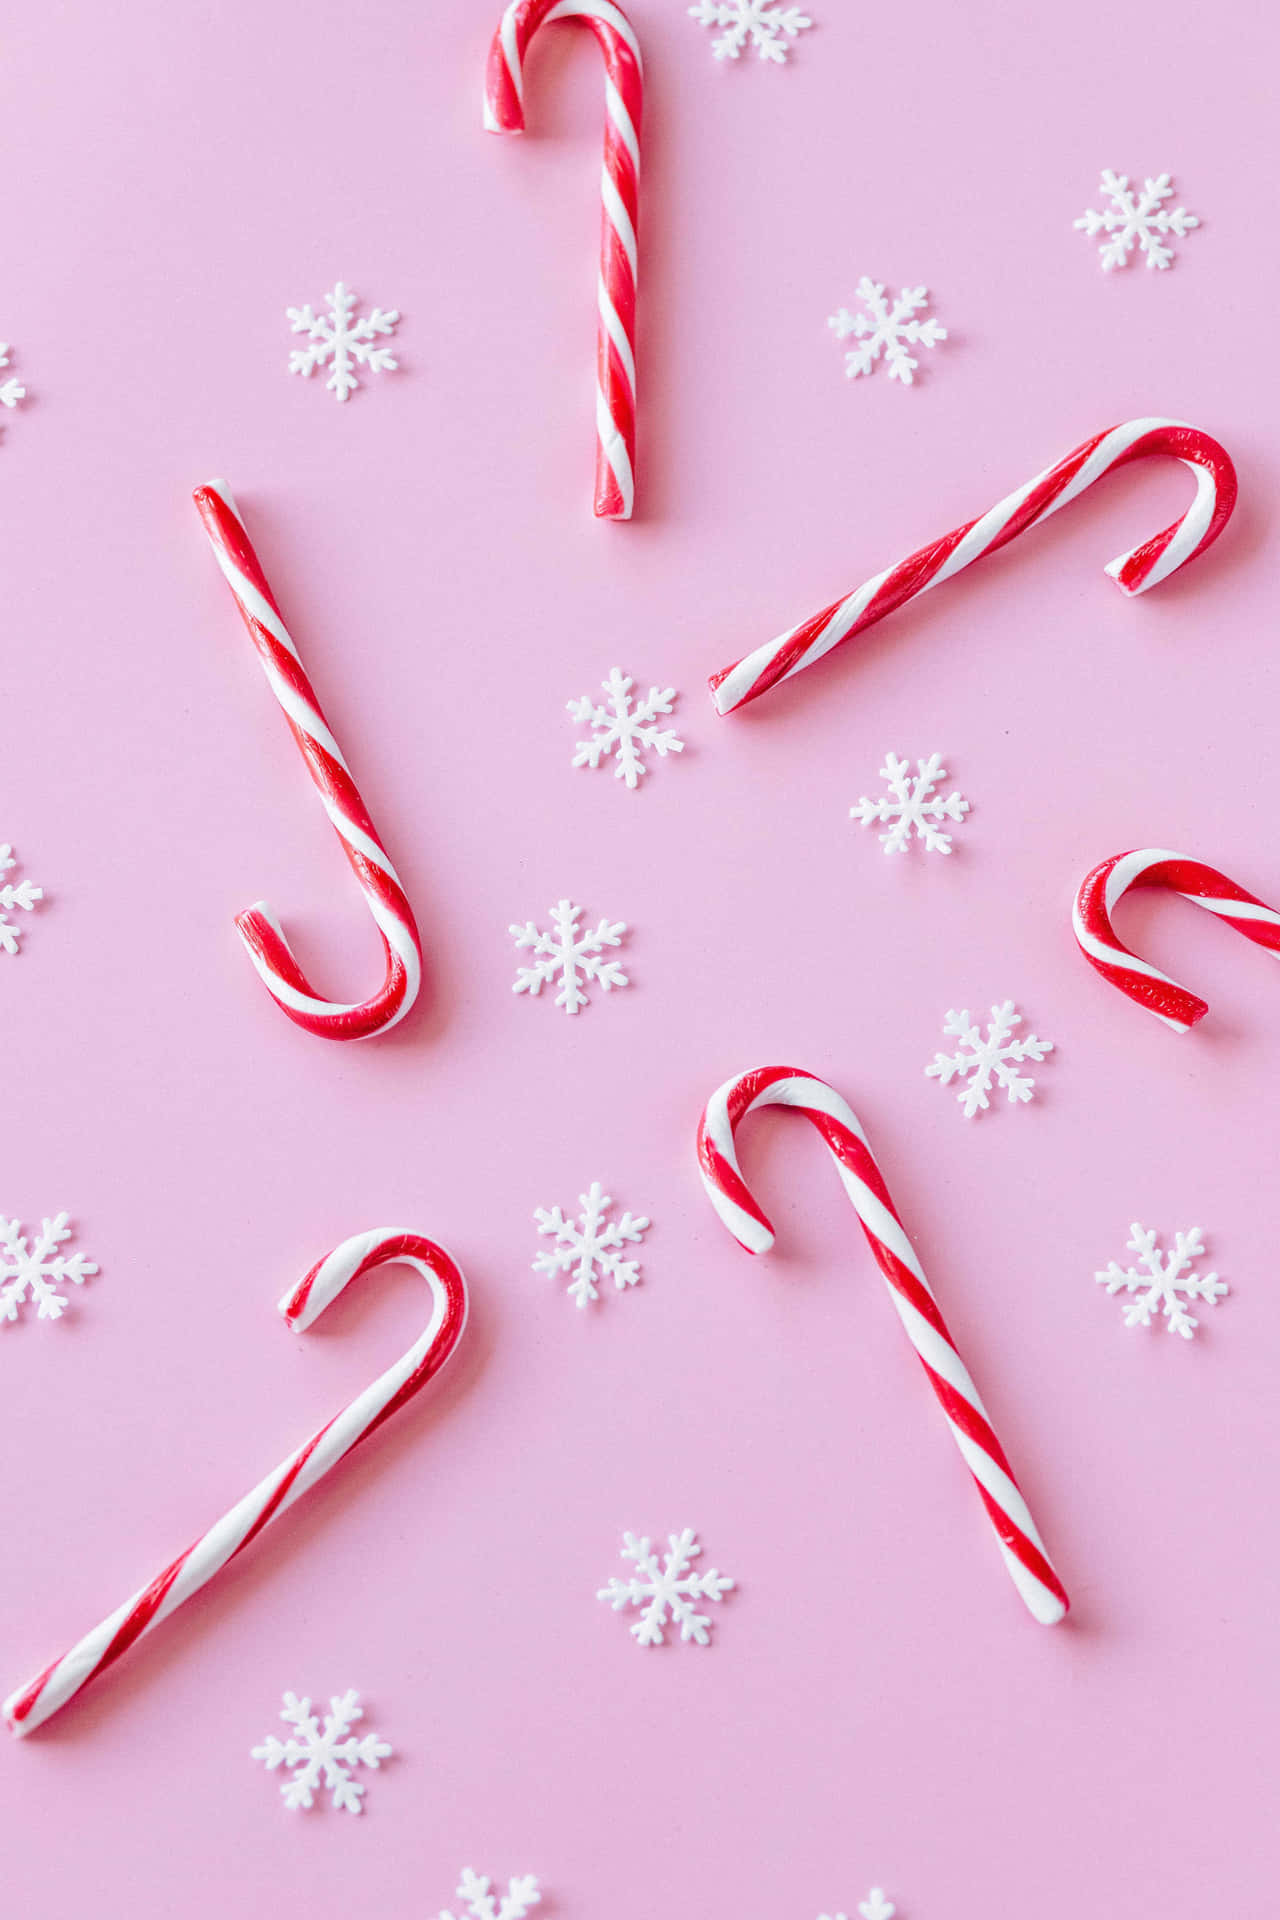 Delightful Pink Candy Close-up Wallpaper